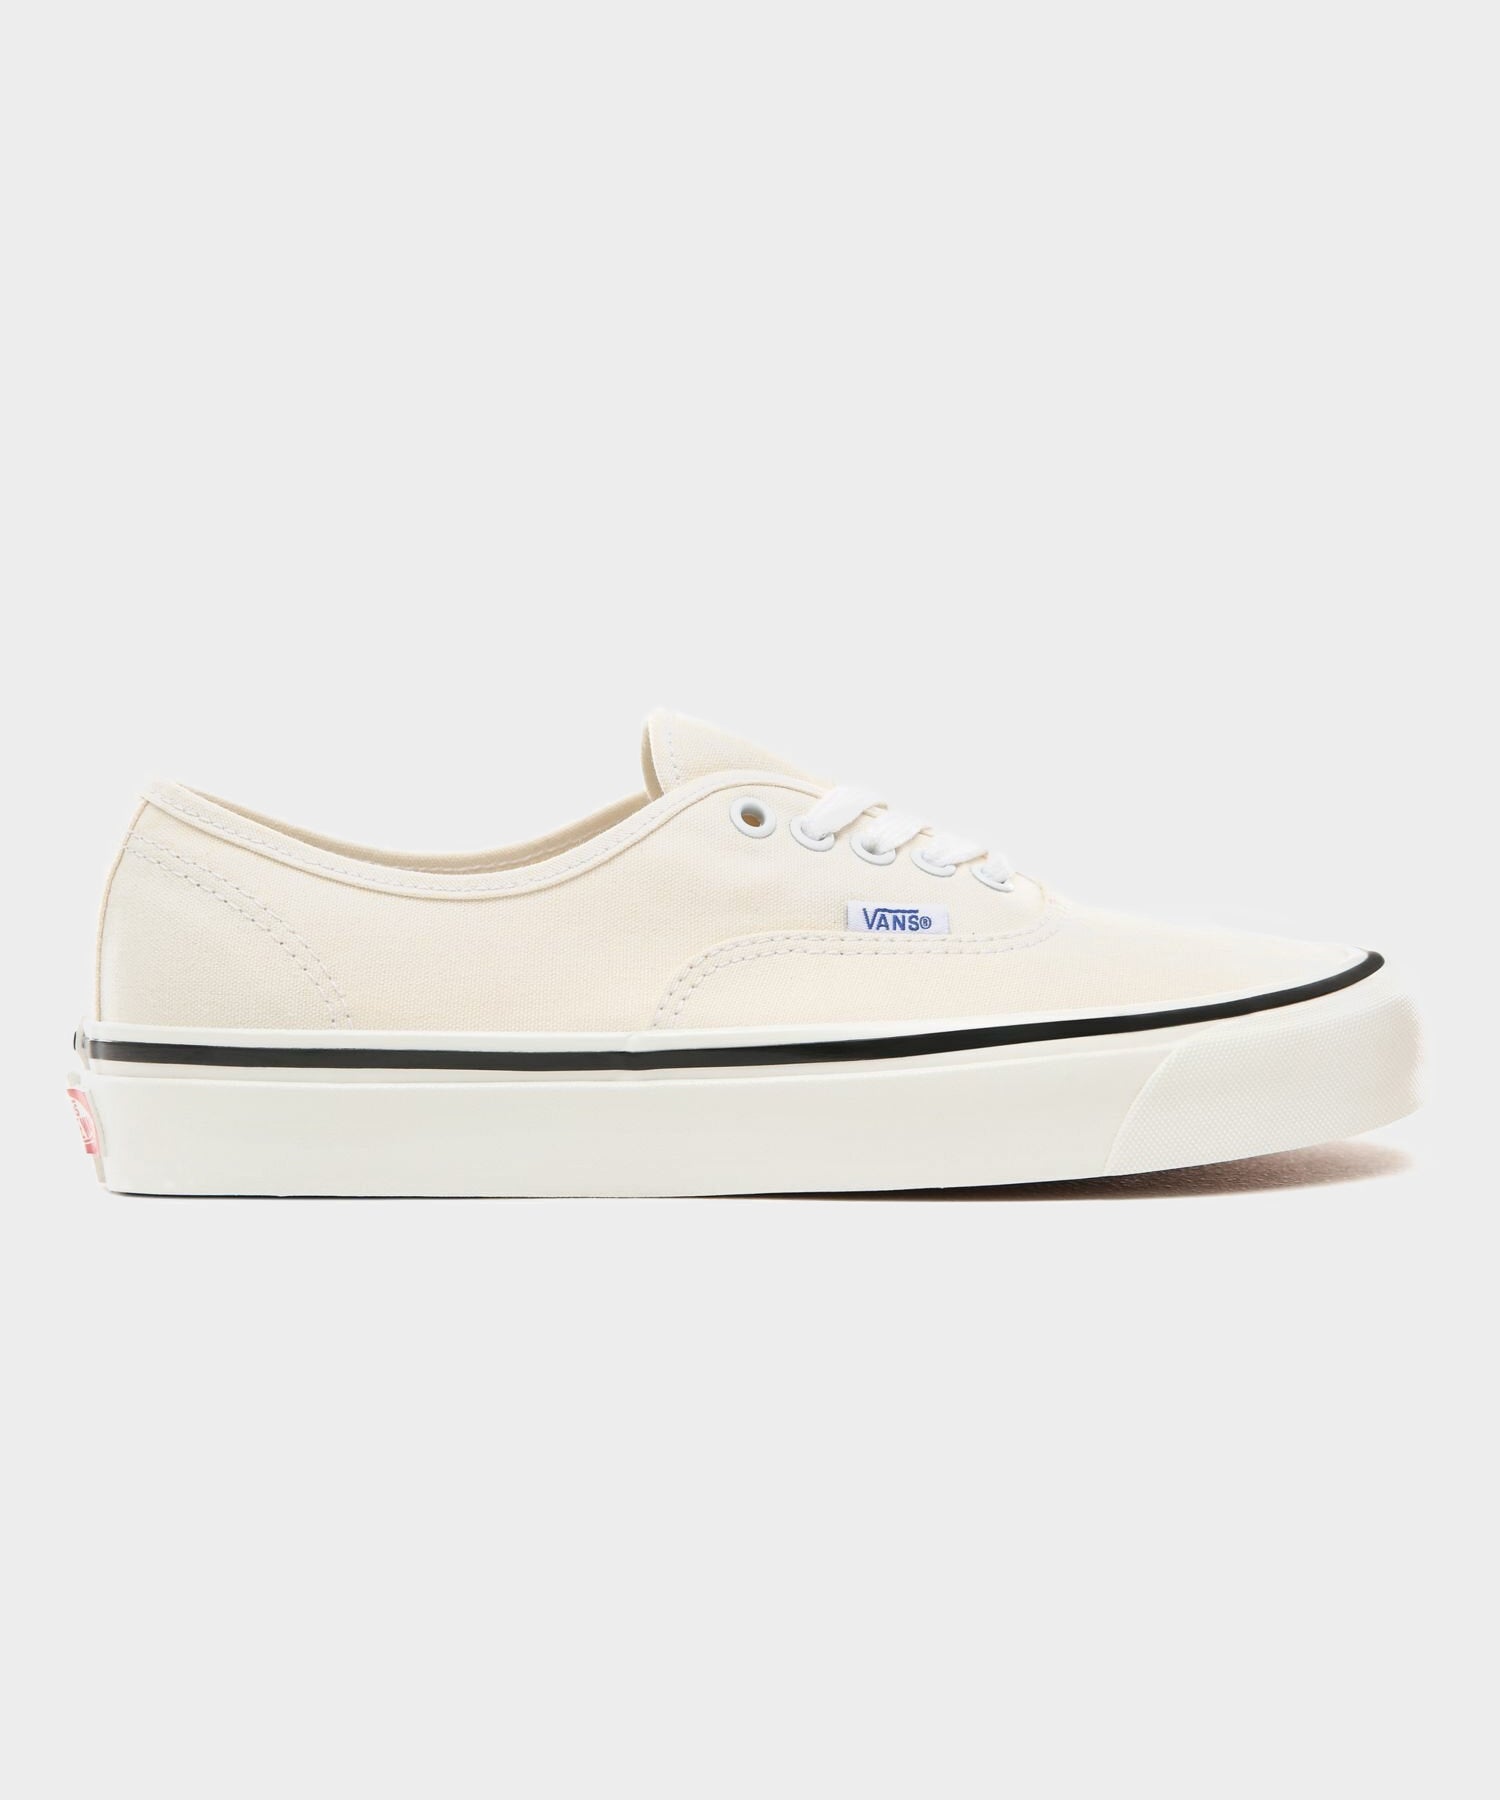 Vans Authentic 44 DX Anaheim Factory in Classic White